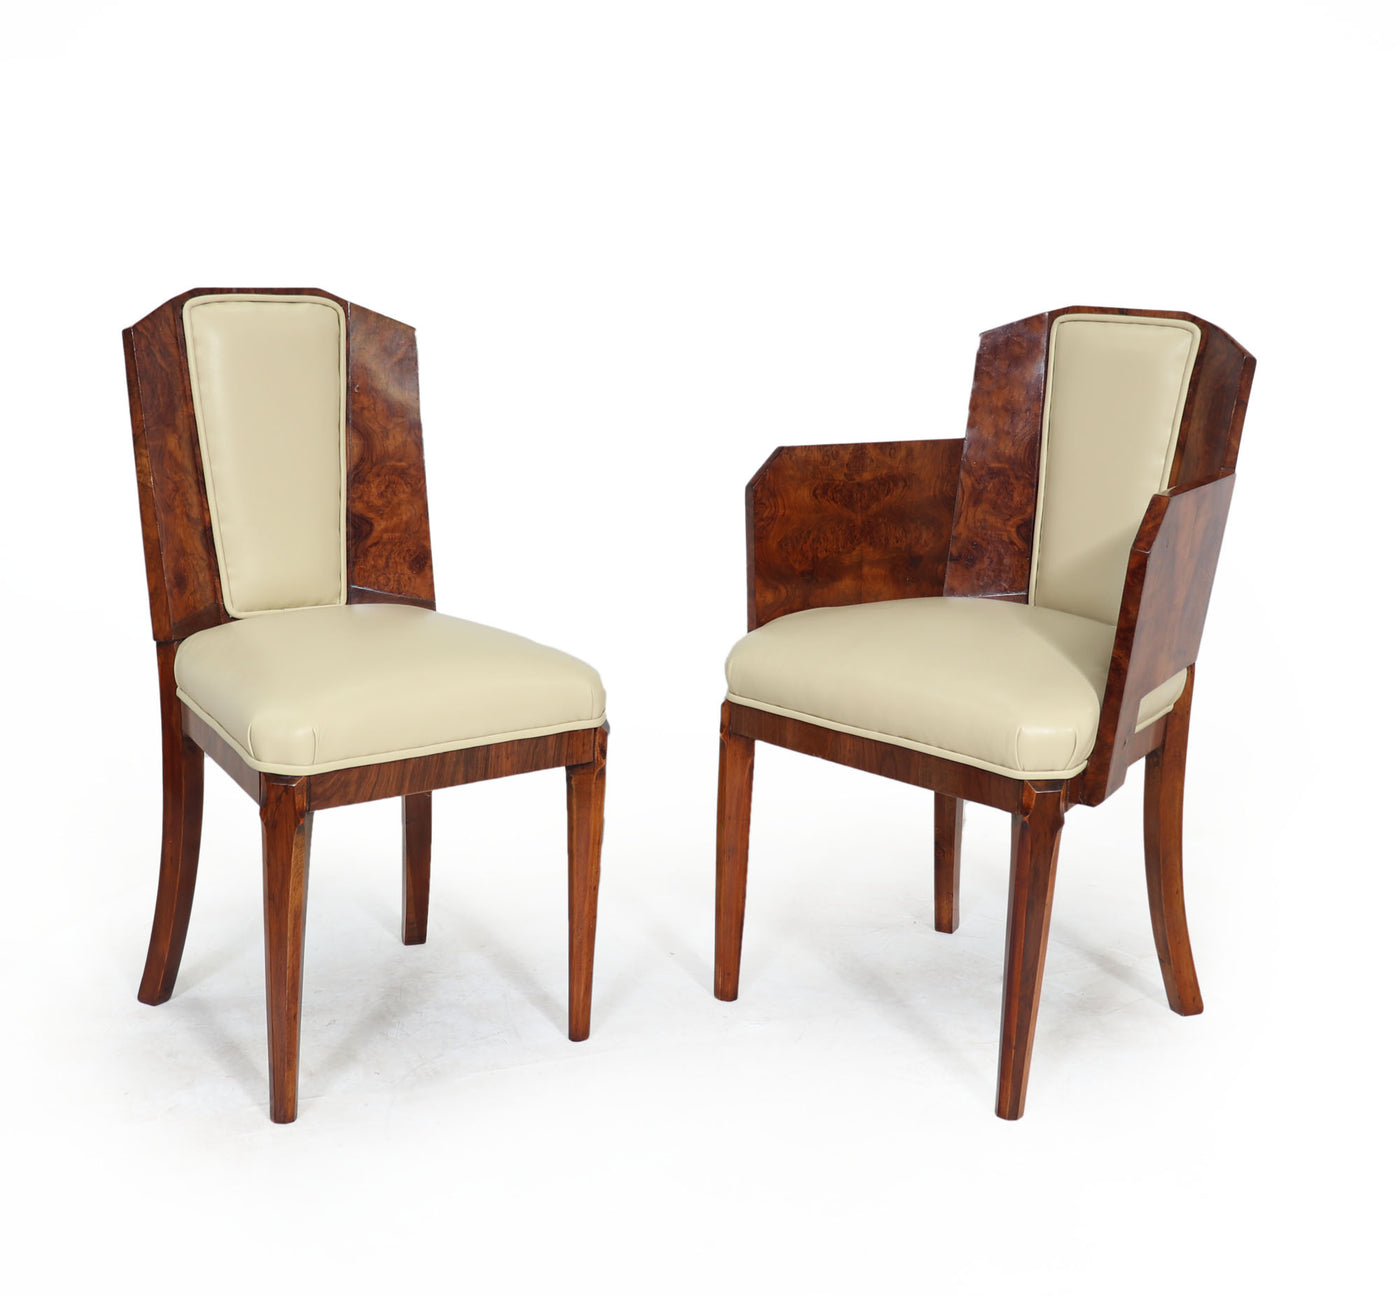 Art Deco Dining Tcarver Chairs by Hille